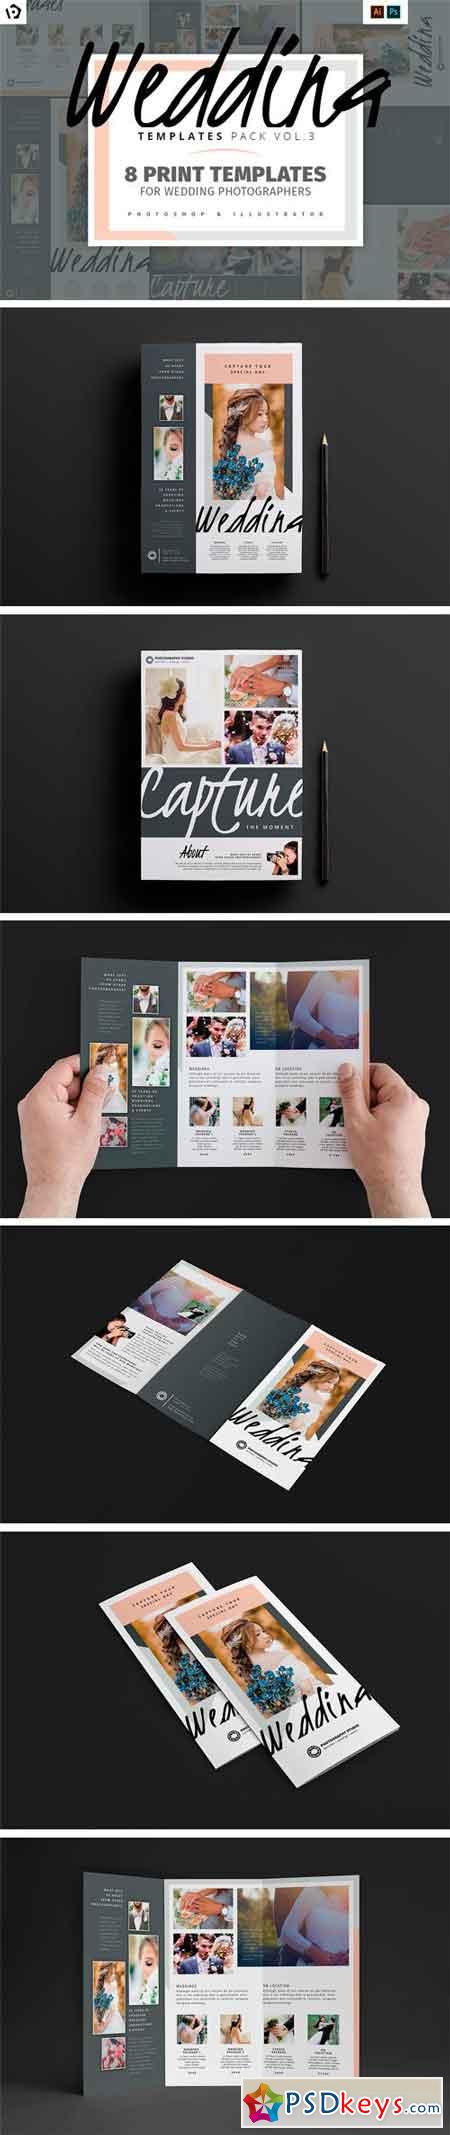 Wedding Photography Templates Pack 3 1347995